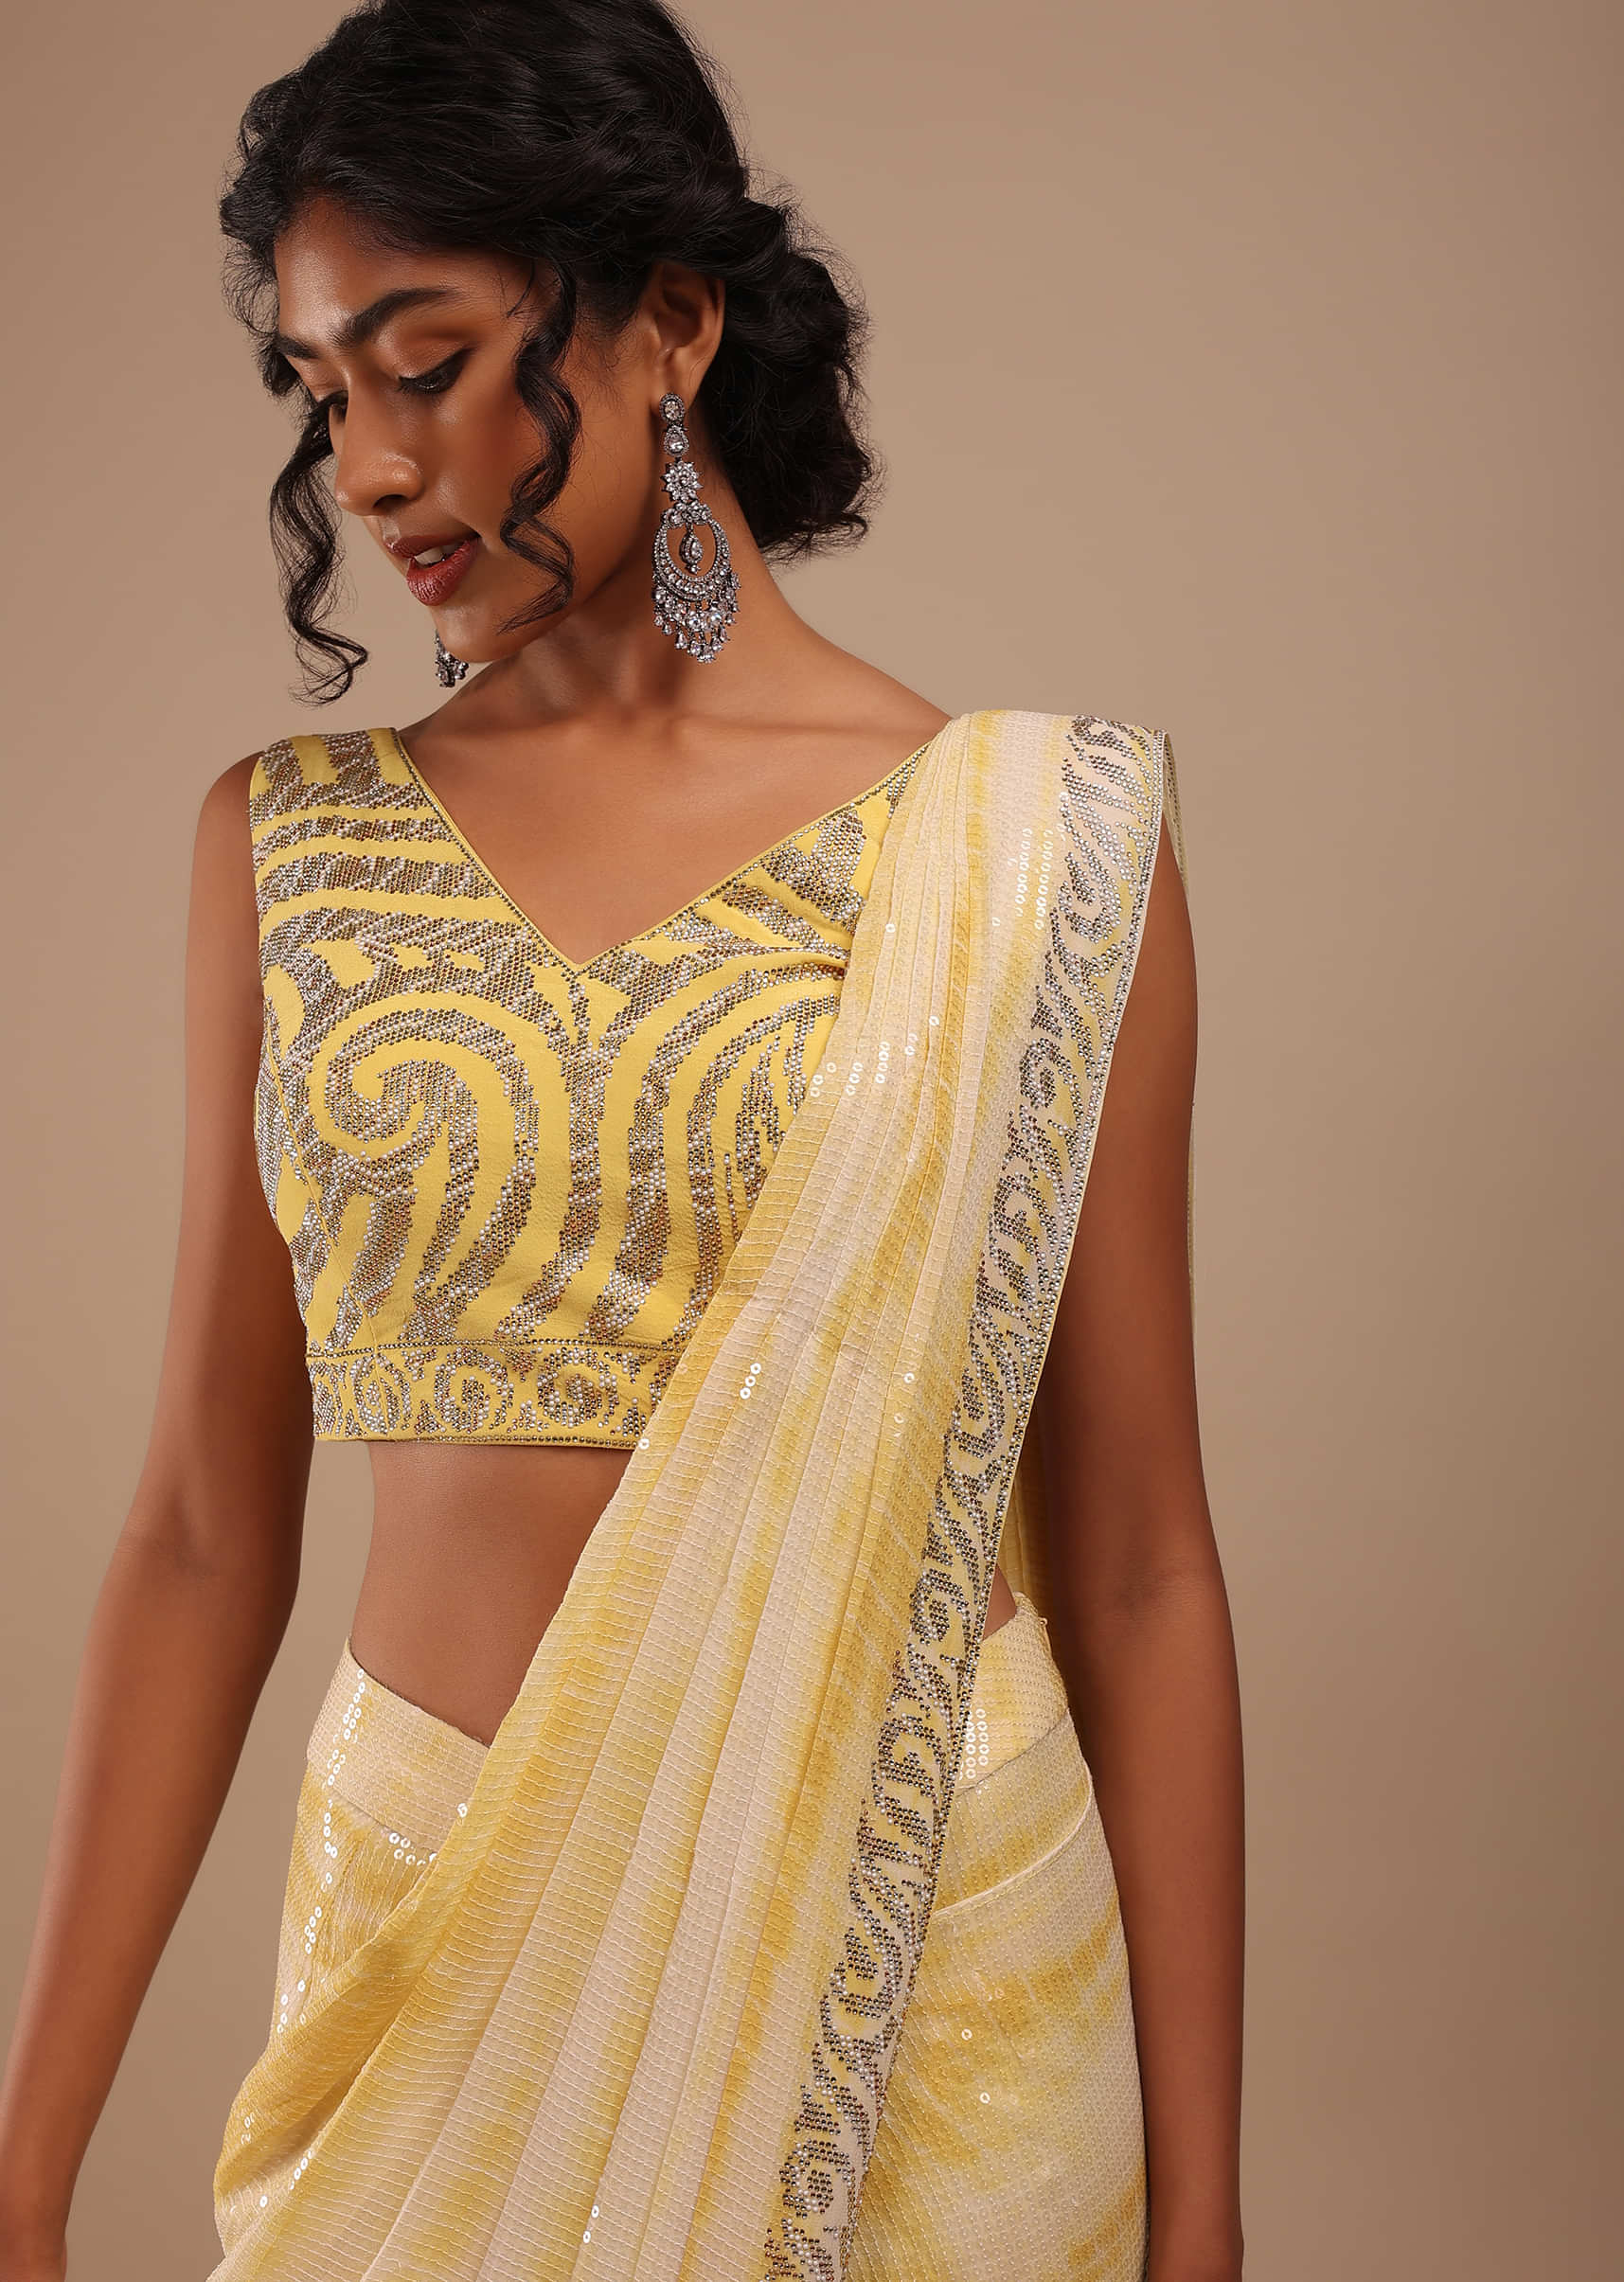 Lemon Yellow And Off-White Ombre Ready Pleated Sequins Saree With Multi-Color Beads Embellishment In Floral Detailing On Pallu Border